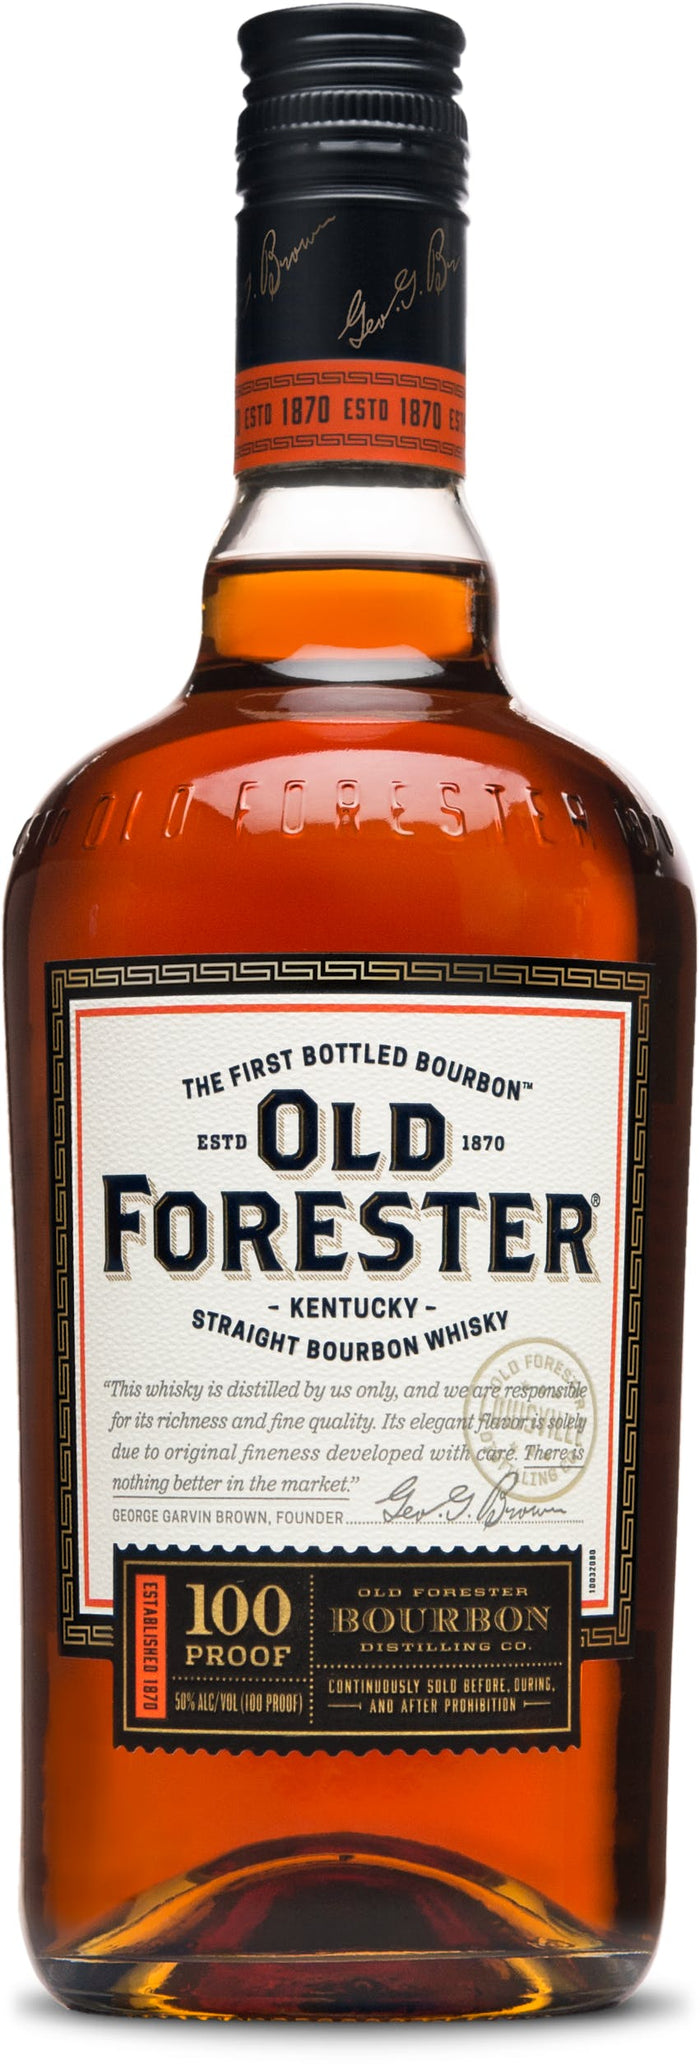 Old Forester Signature Kentucky Straight Bourbon Whiskey